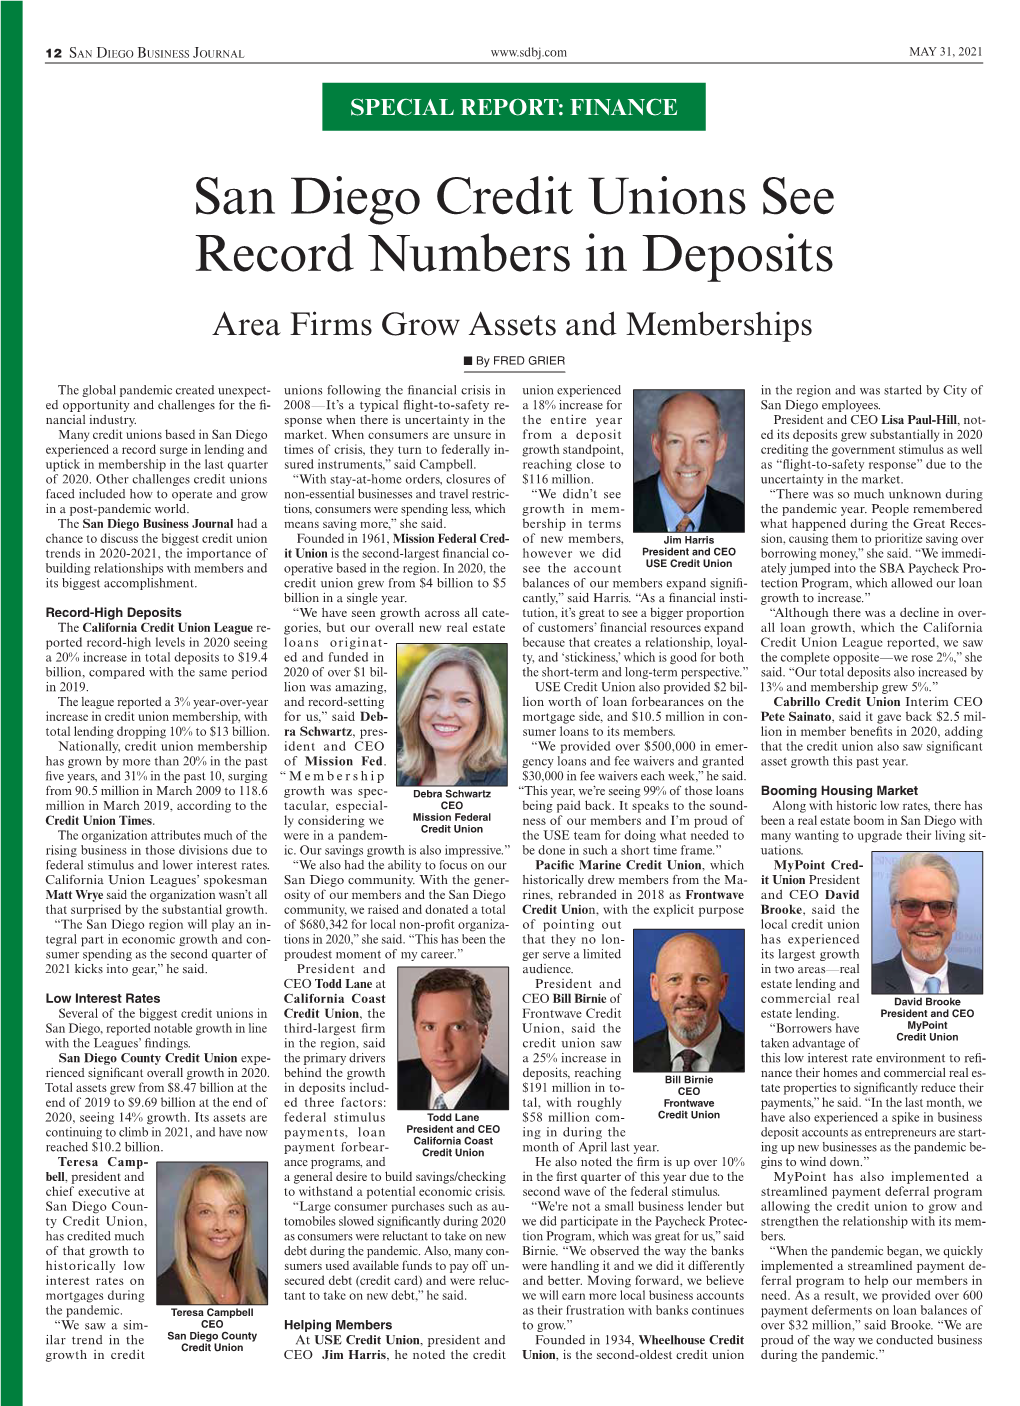 San Diego Credit Unions See Record Numbers in Deposits Area Firms Grow Assets and Memberships „ by FRED GRIER